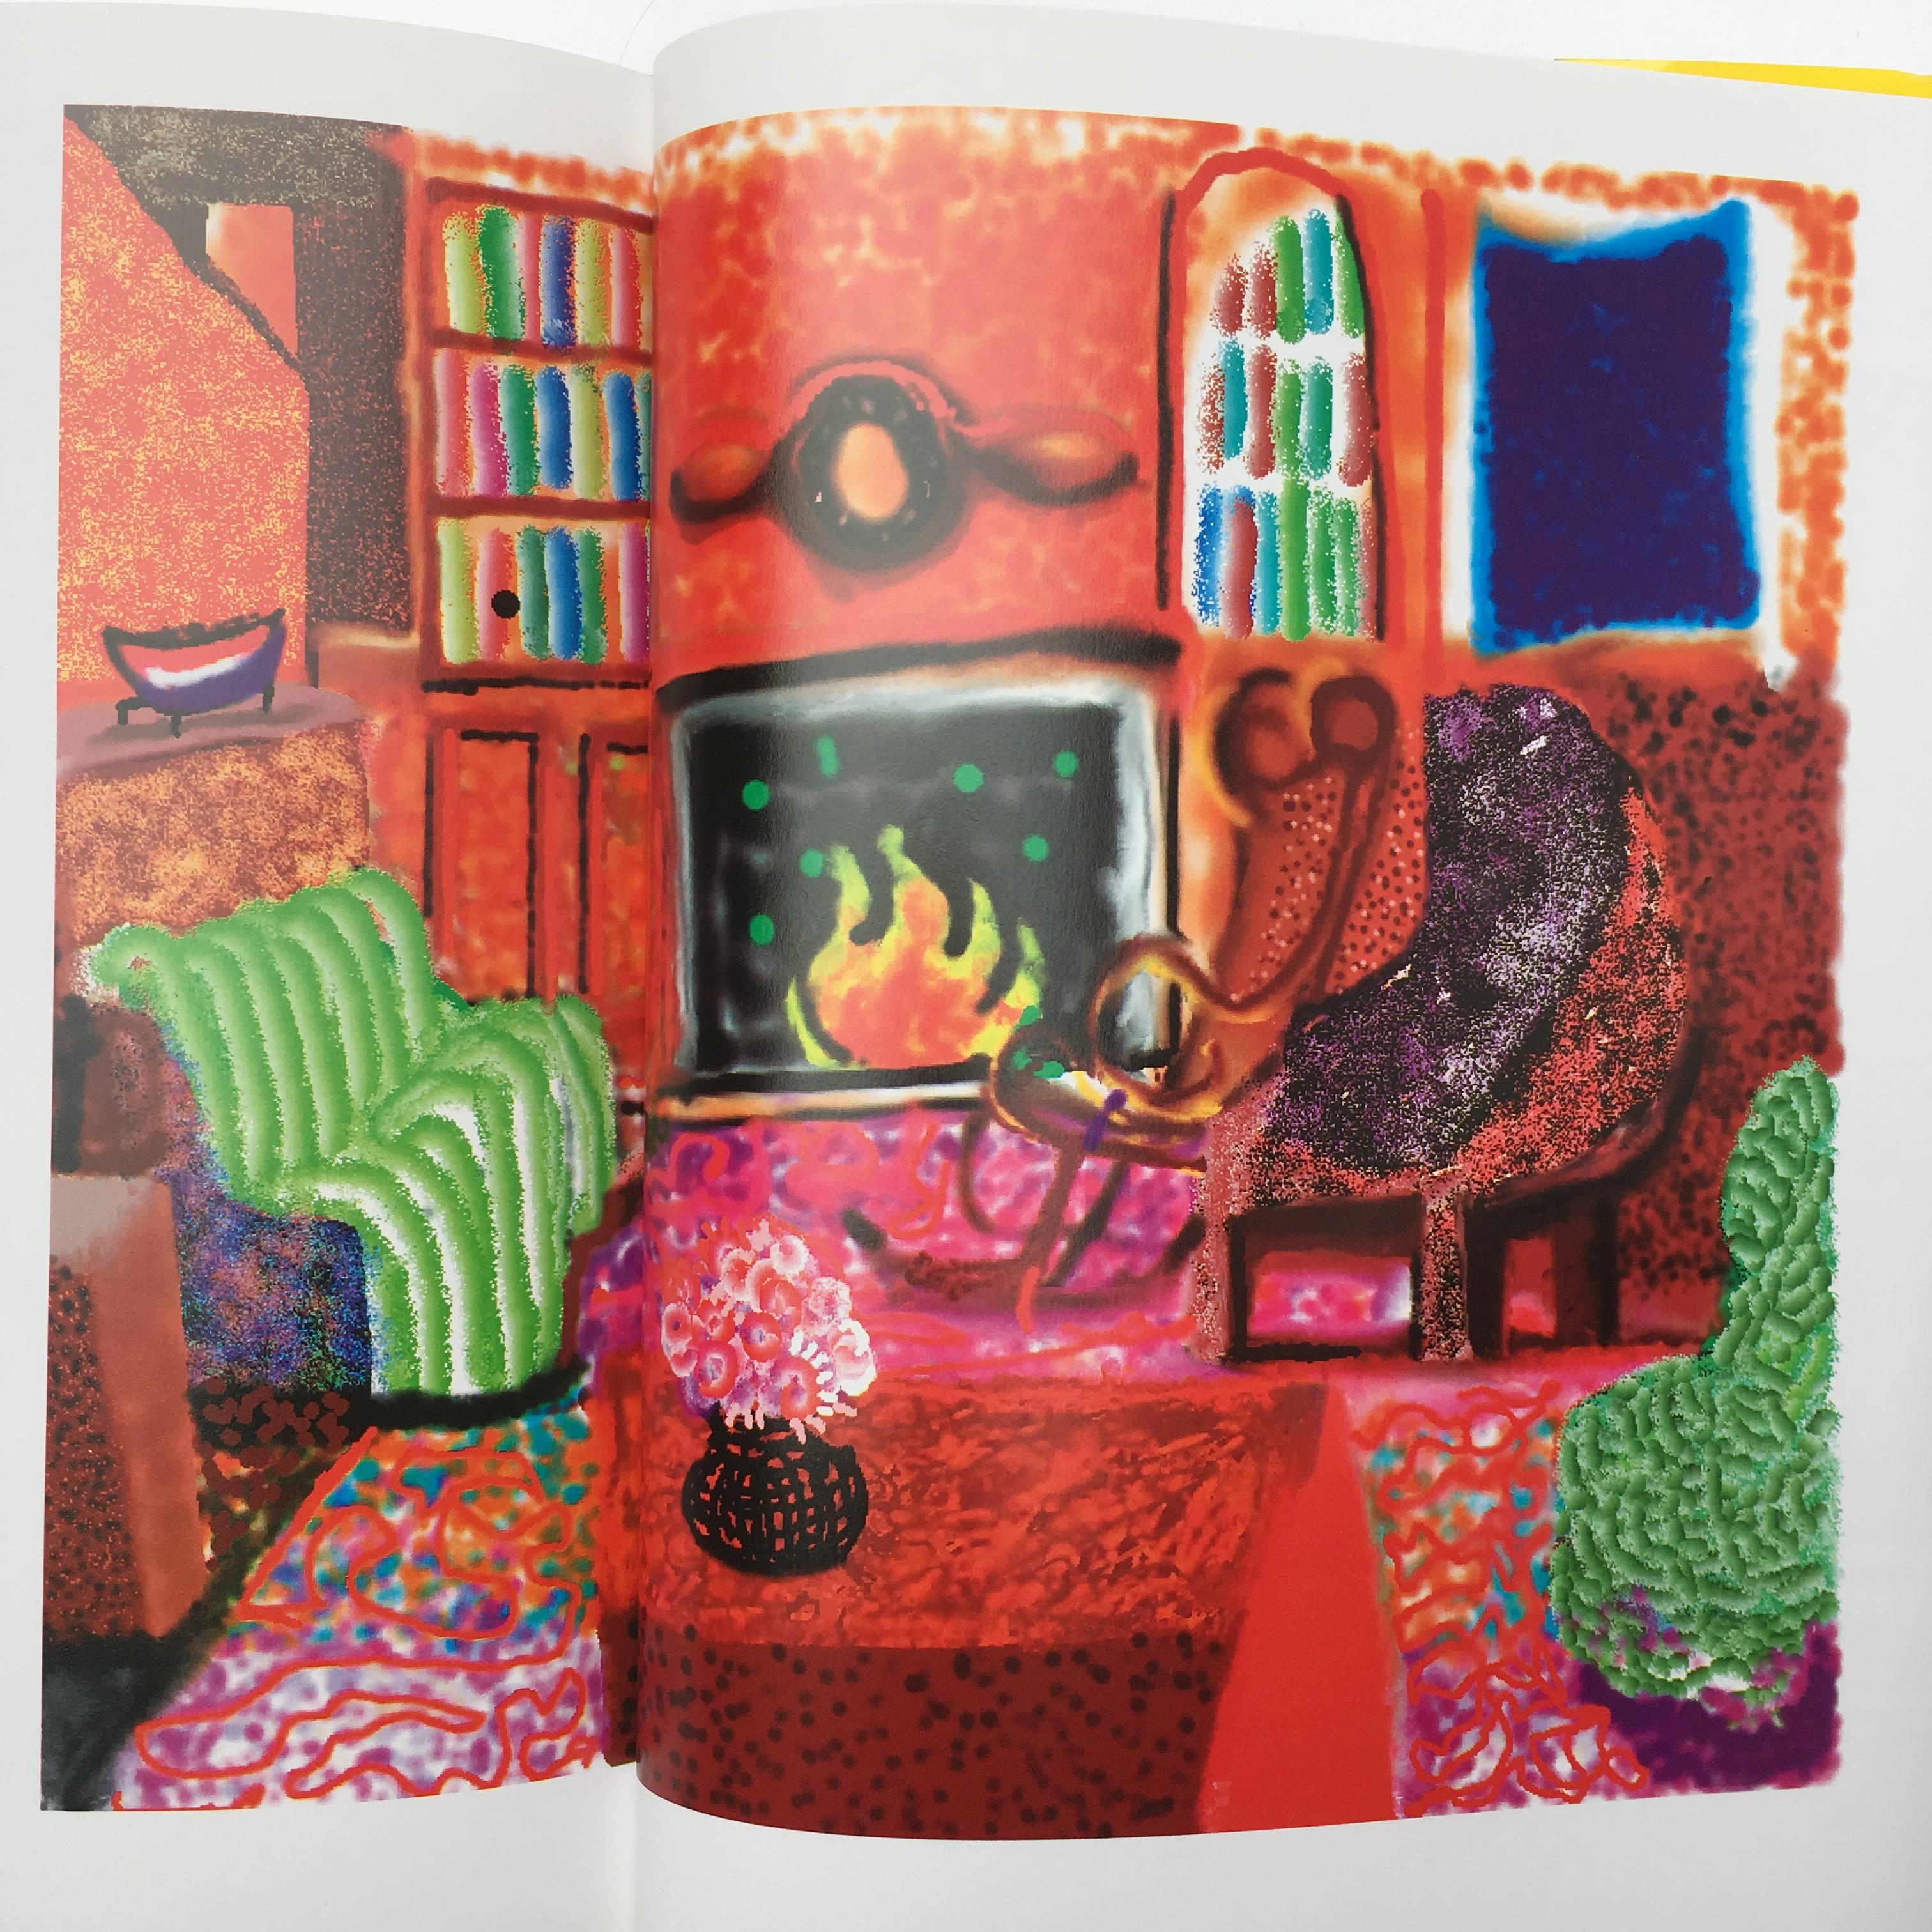 David Hockney – That's The Way I See It, 1st Edition 1993 1